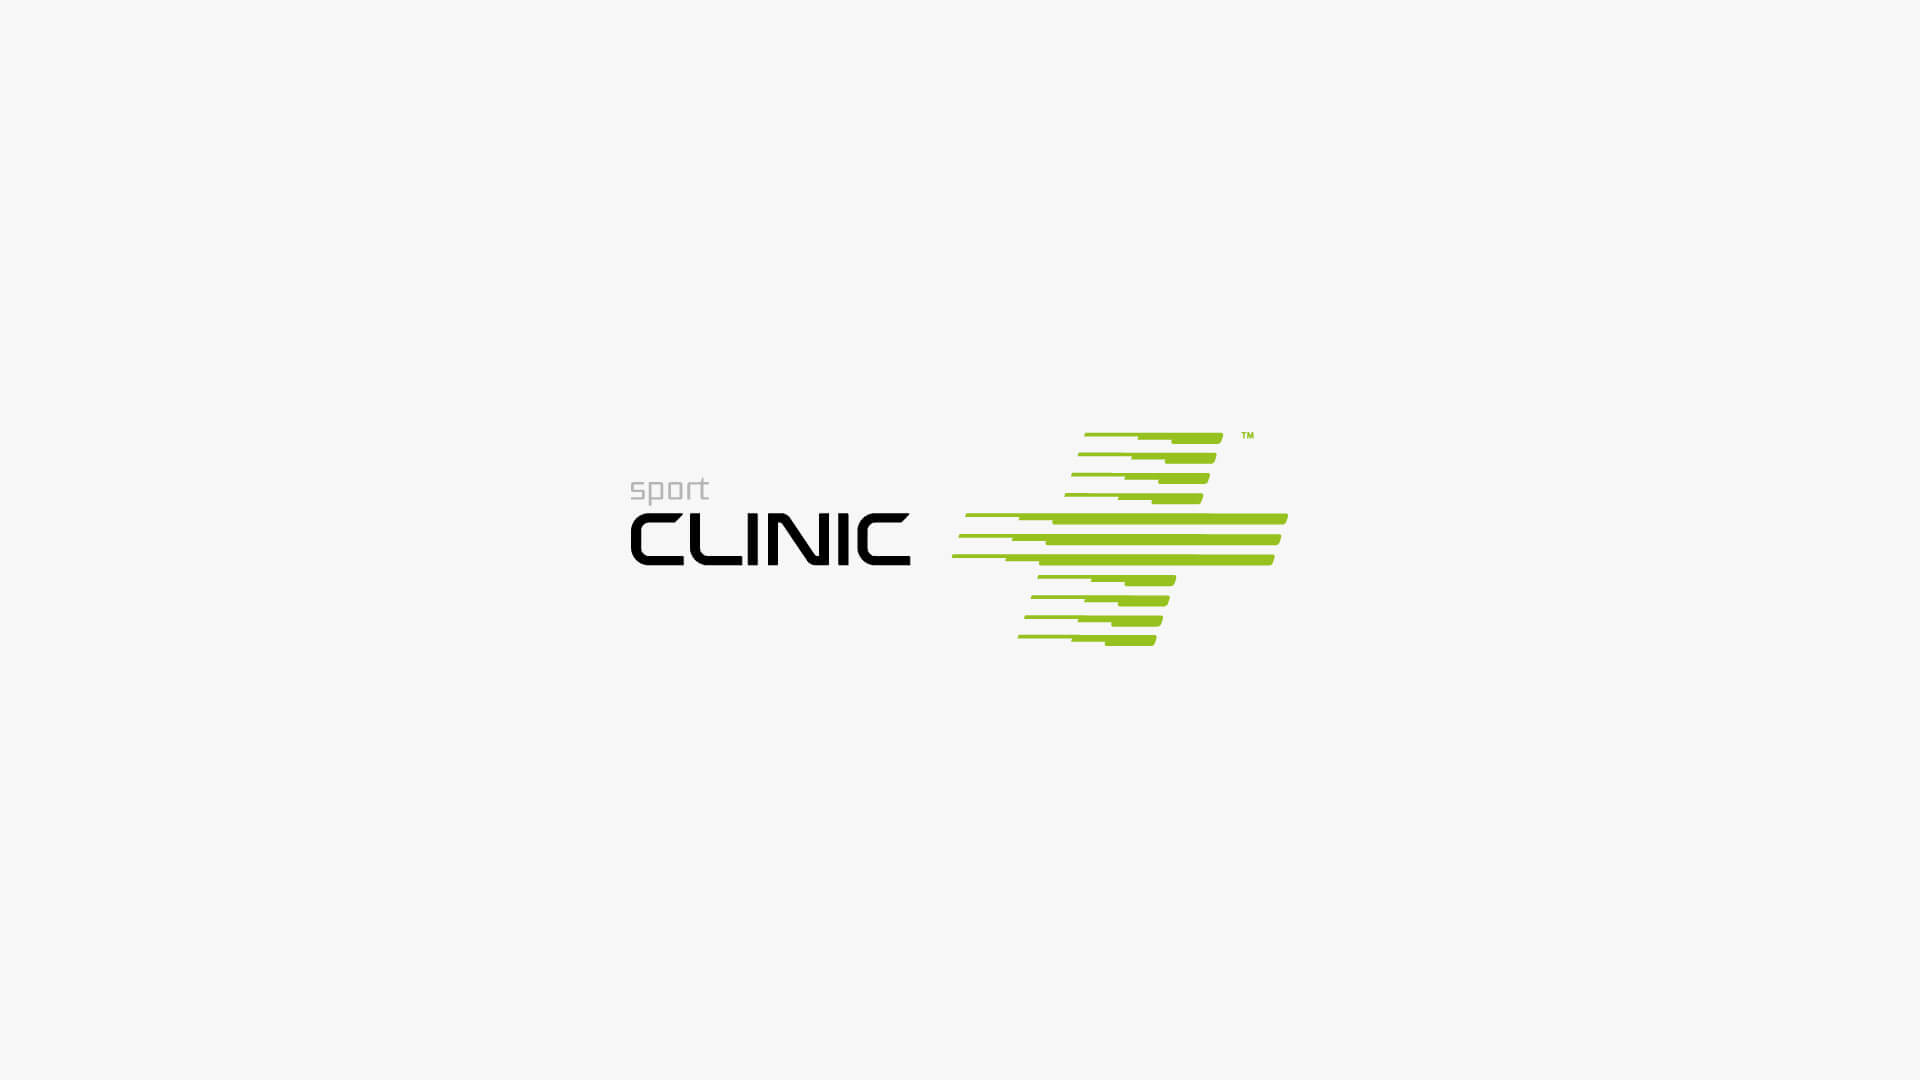 Clinic_layout_03